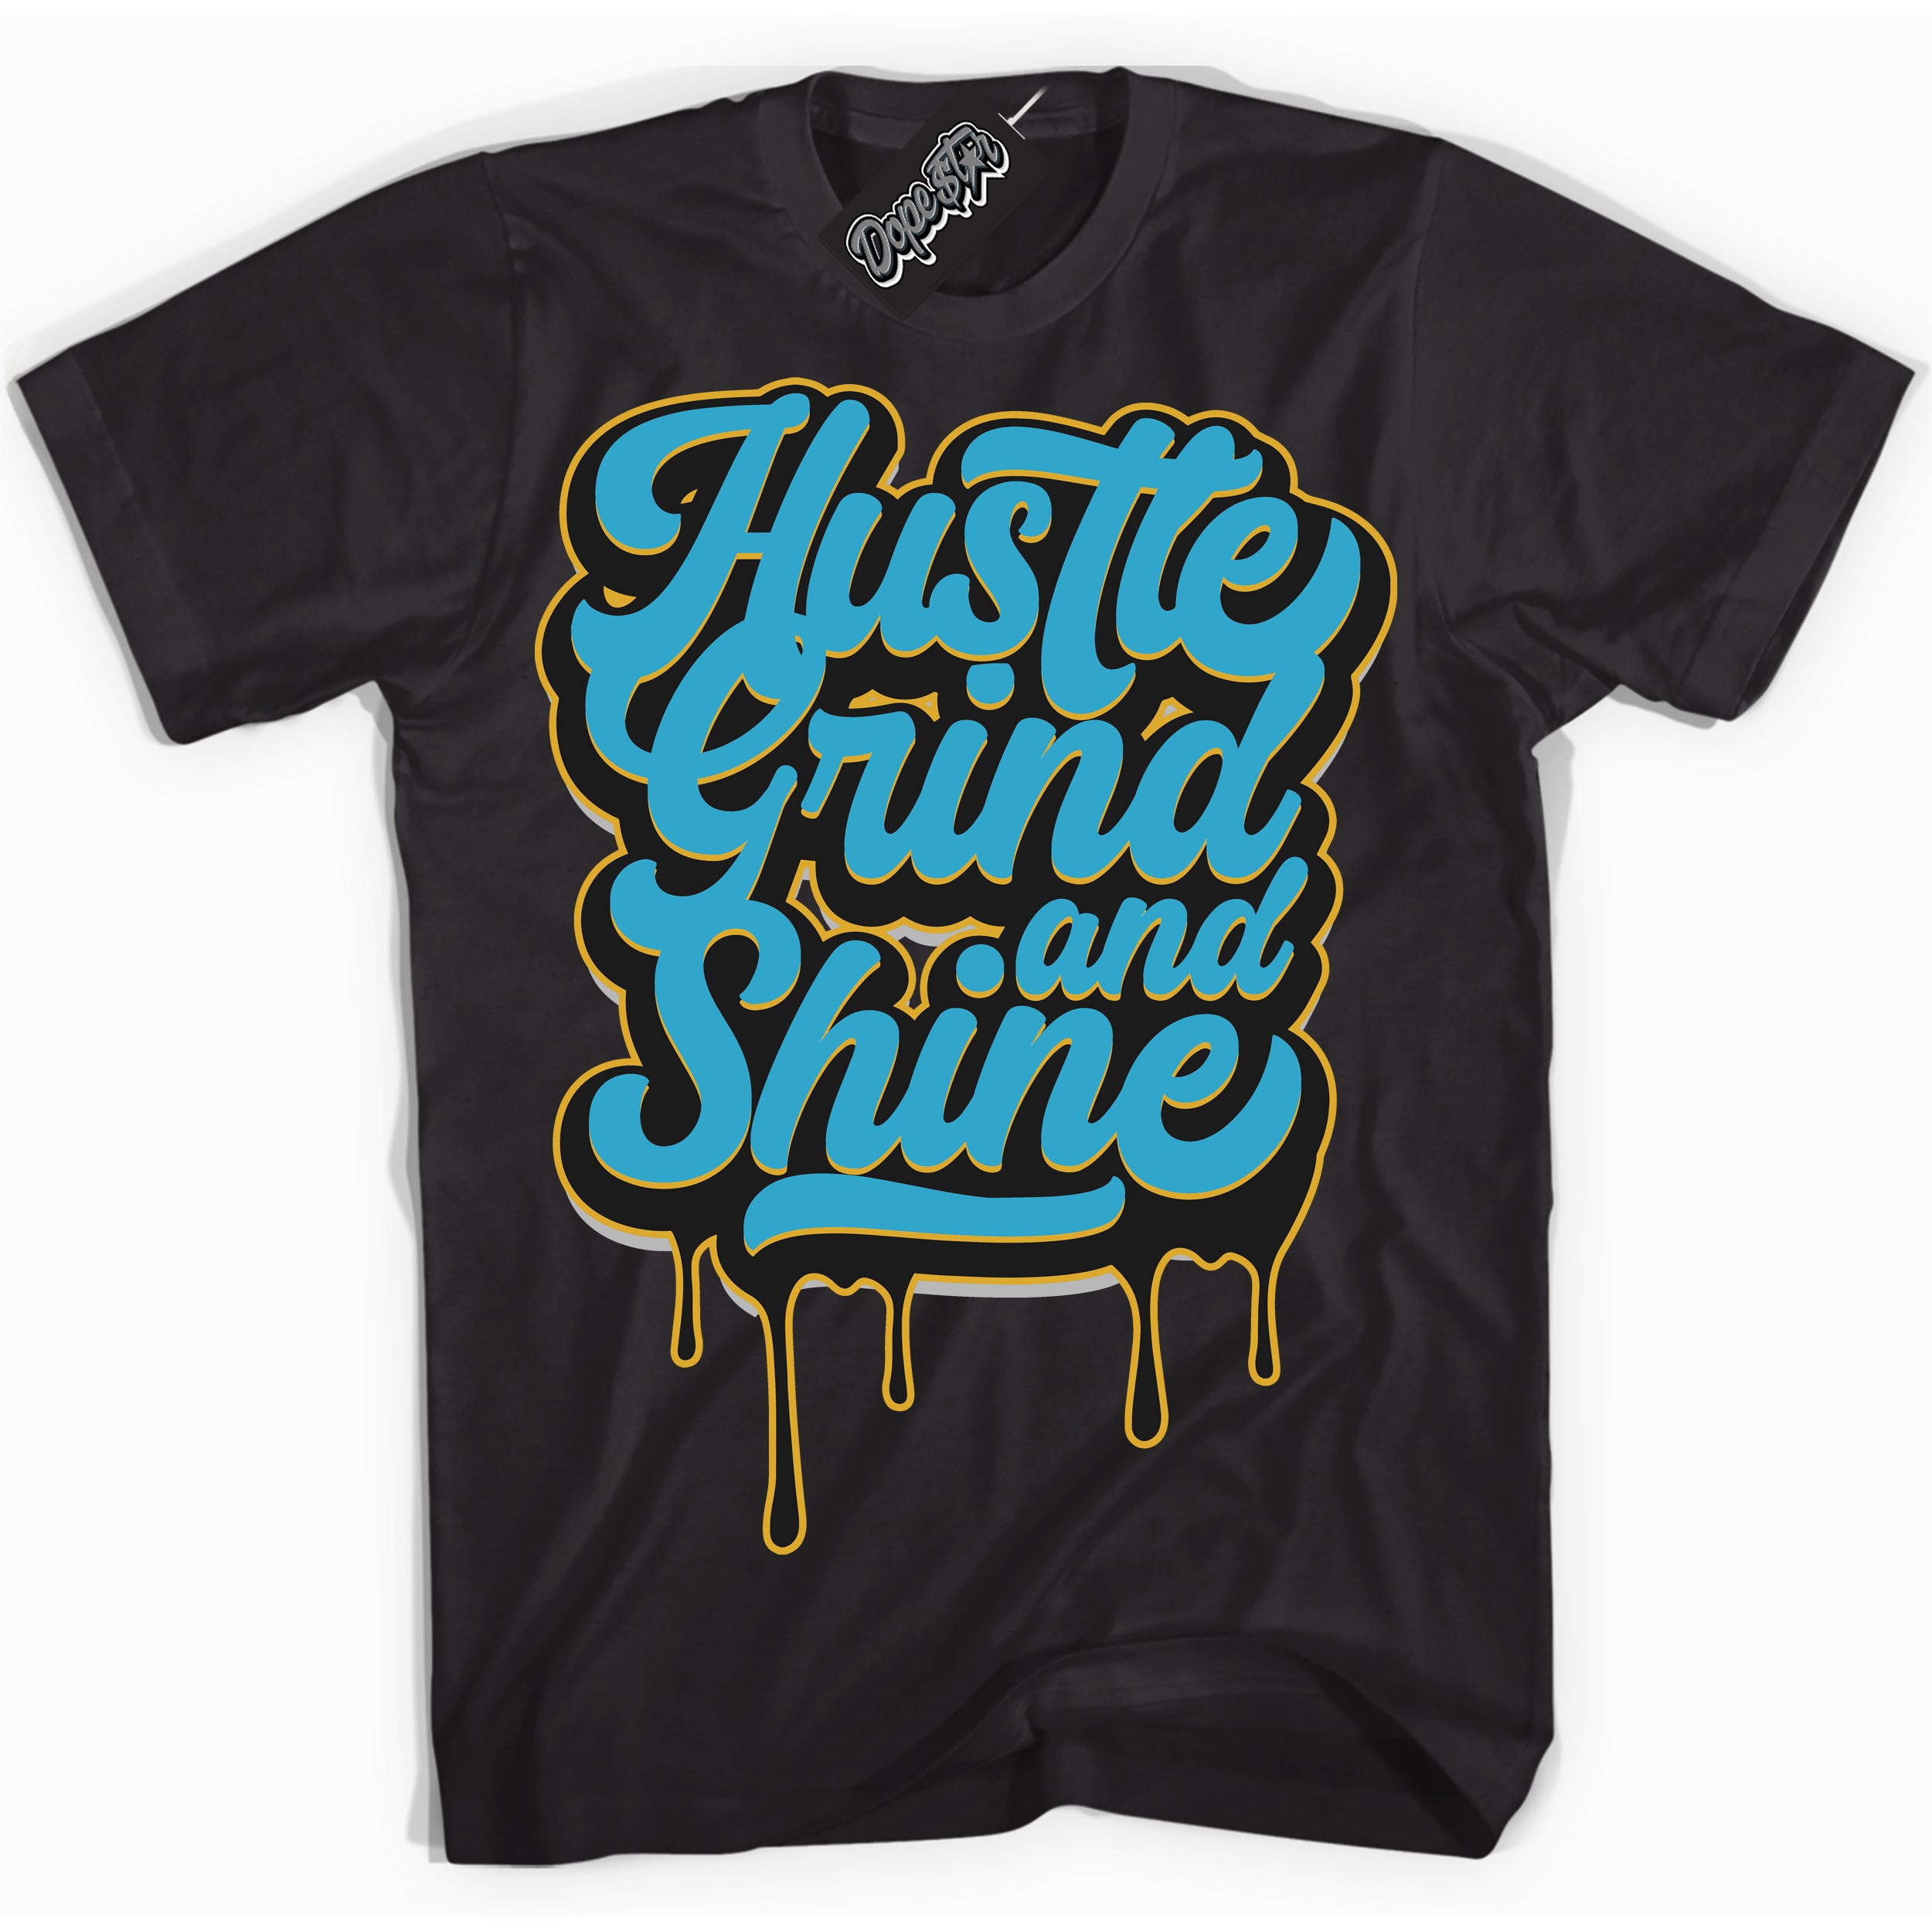 Cool Black Shirt with “ Hustle Grind And Shine” design that perfectly matches Aqua 5s Sneakers.